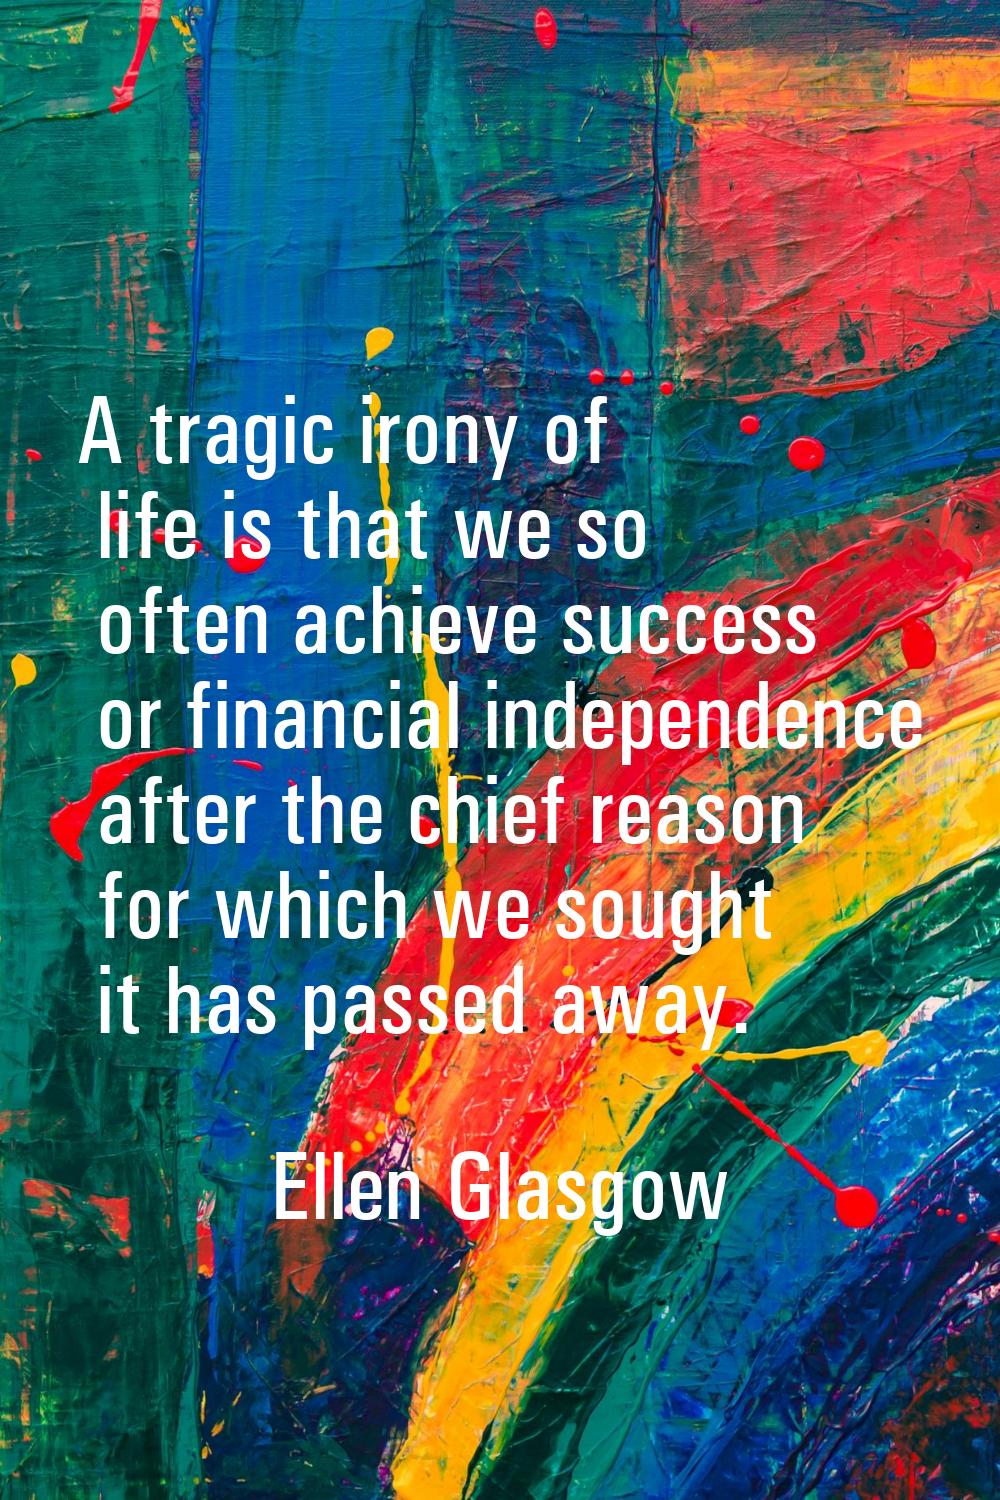 A tragic irony of life is that we so often achieve success or financial independence after the chie